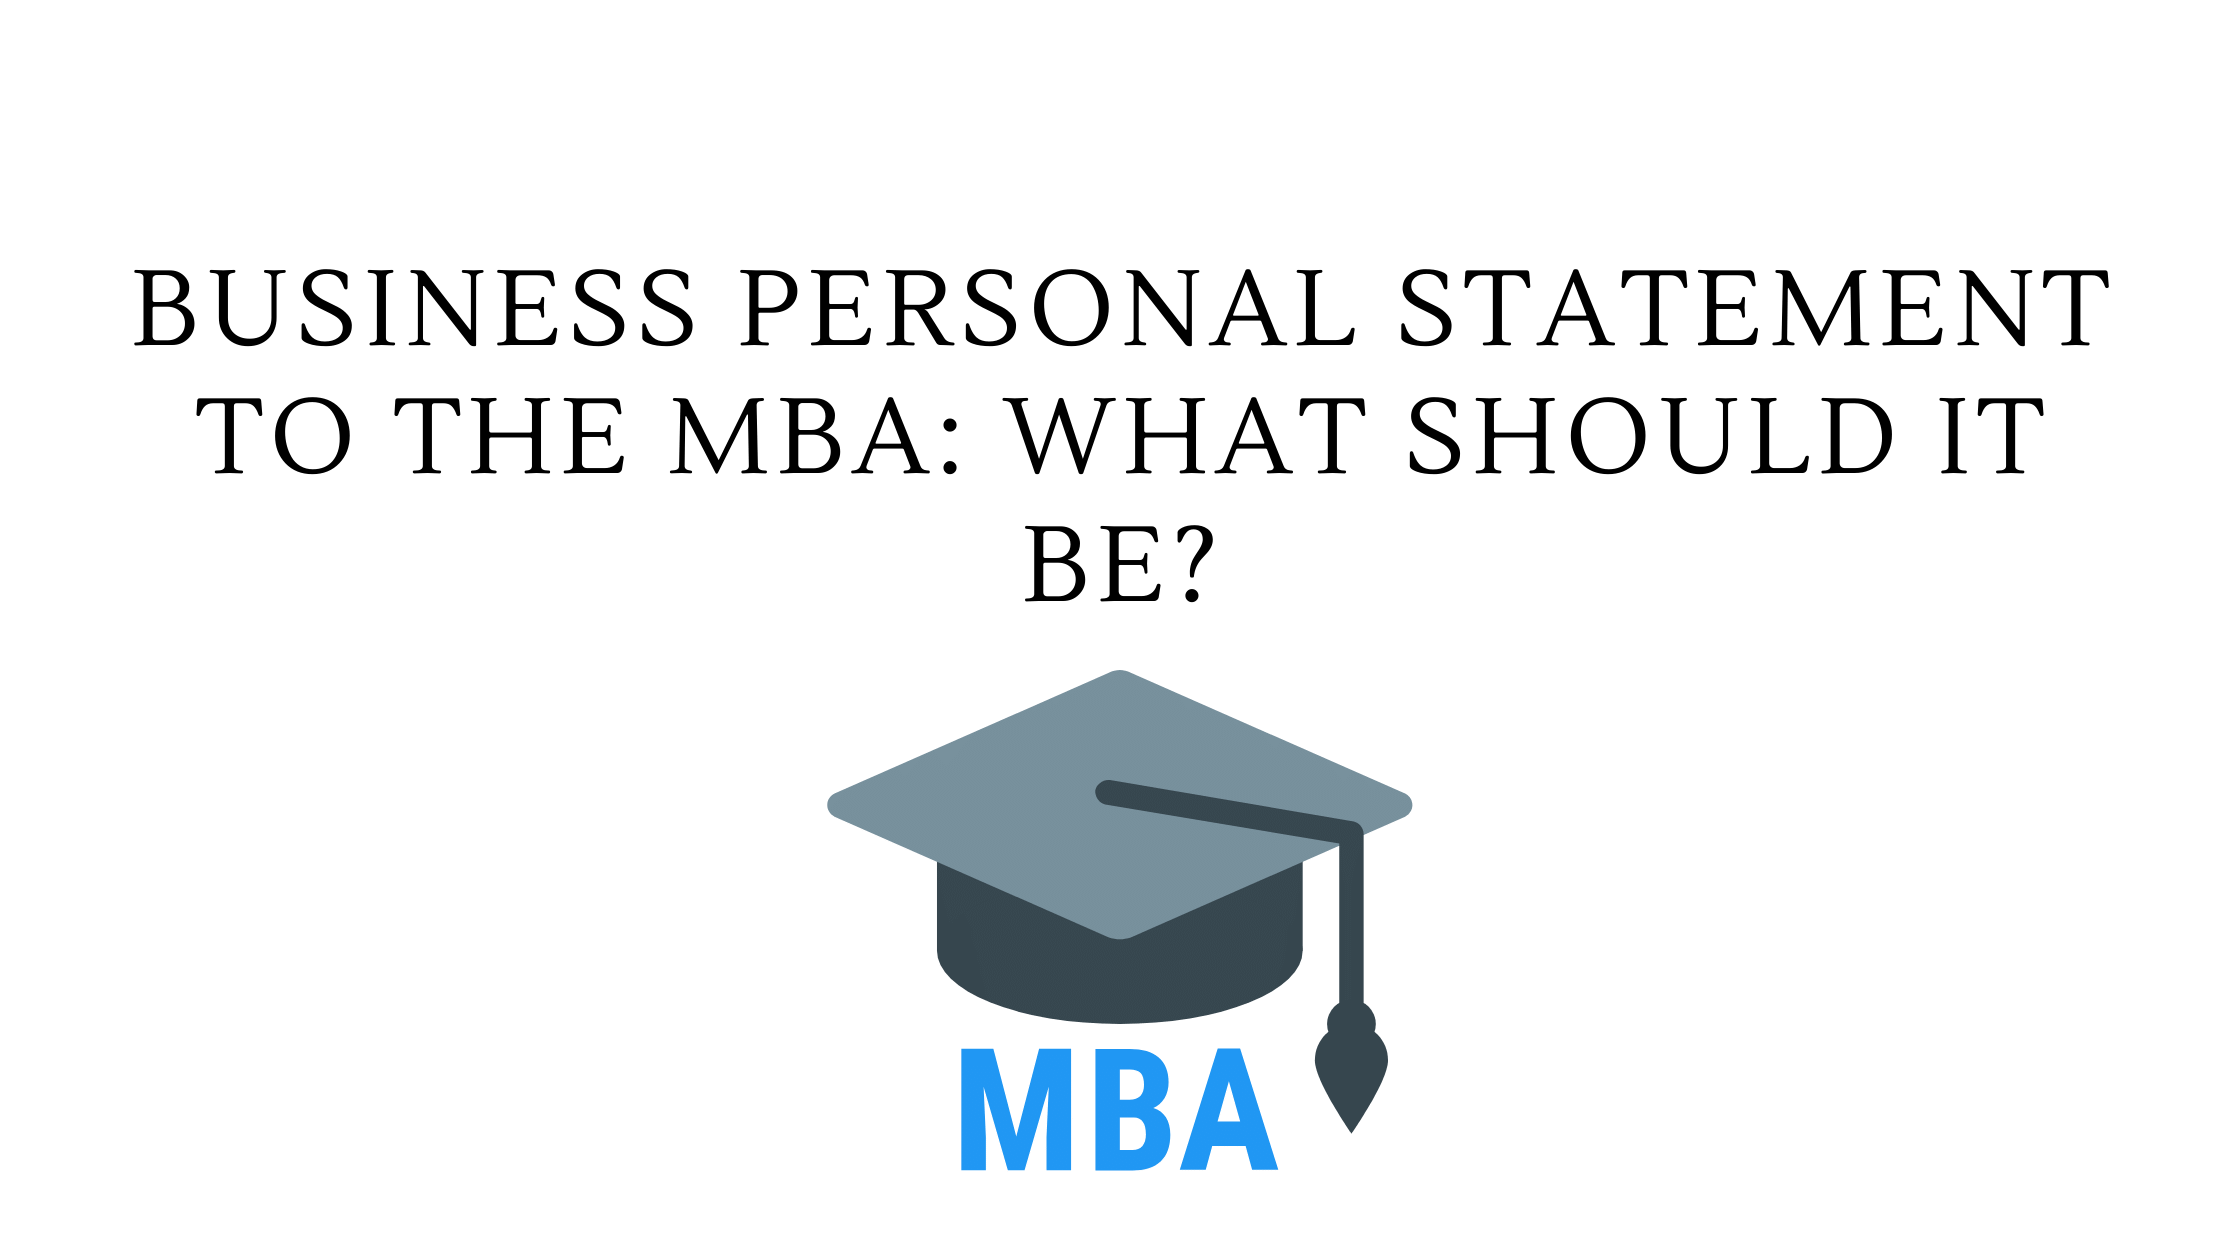 Business Personal Statement To The MBA